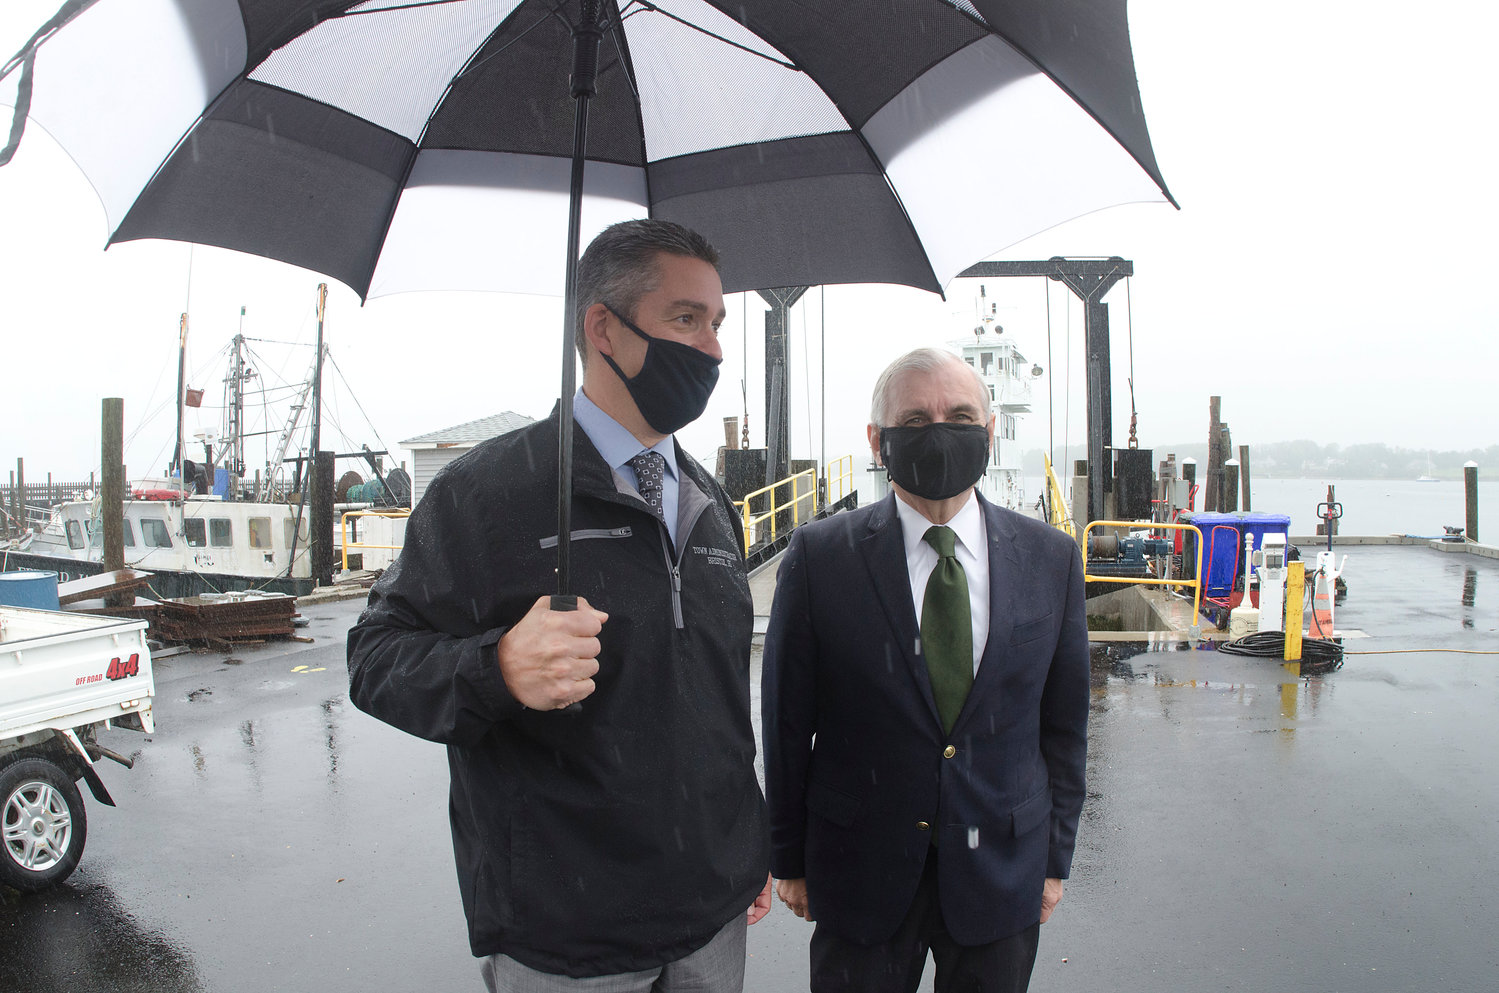 Town Administrator Steve Contente (left) gives a quick tour of the Church Street and Prudence Island Ferry docks to Sen.Jack Reed on a drizzly Tuesday morning.